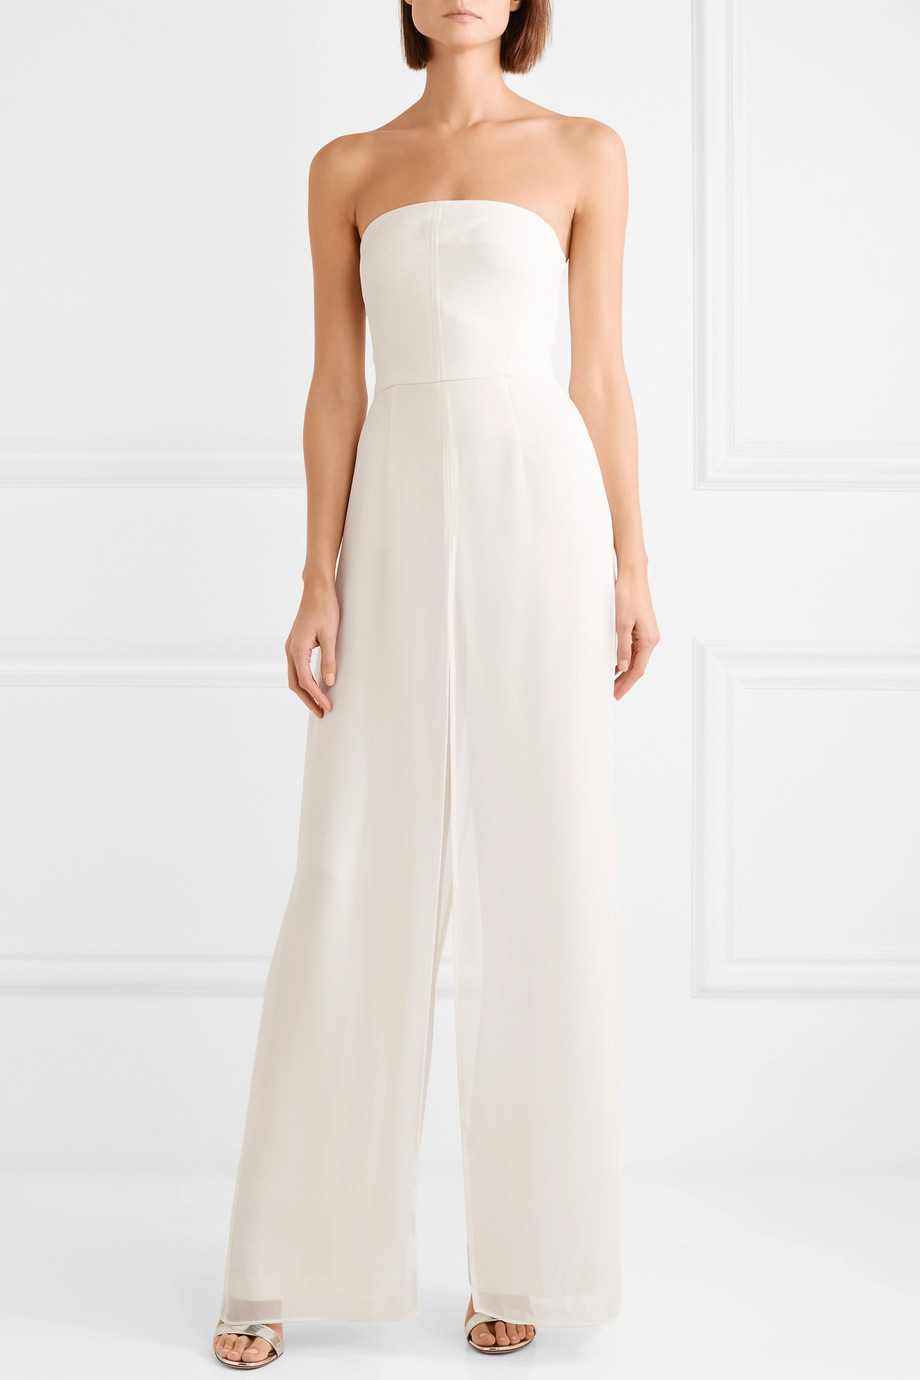 You’ll Love These Sophisticated Bridal Jumpsuits